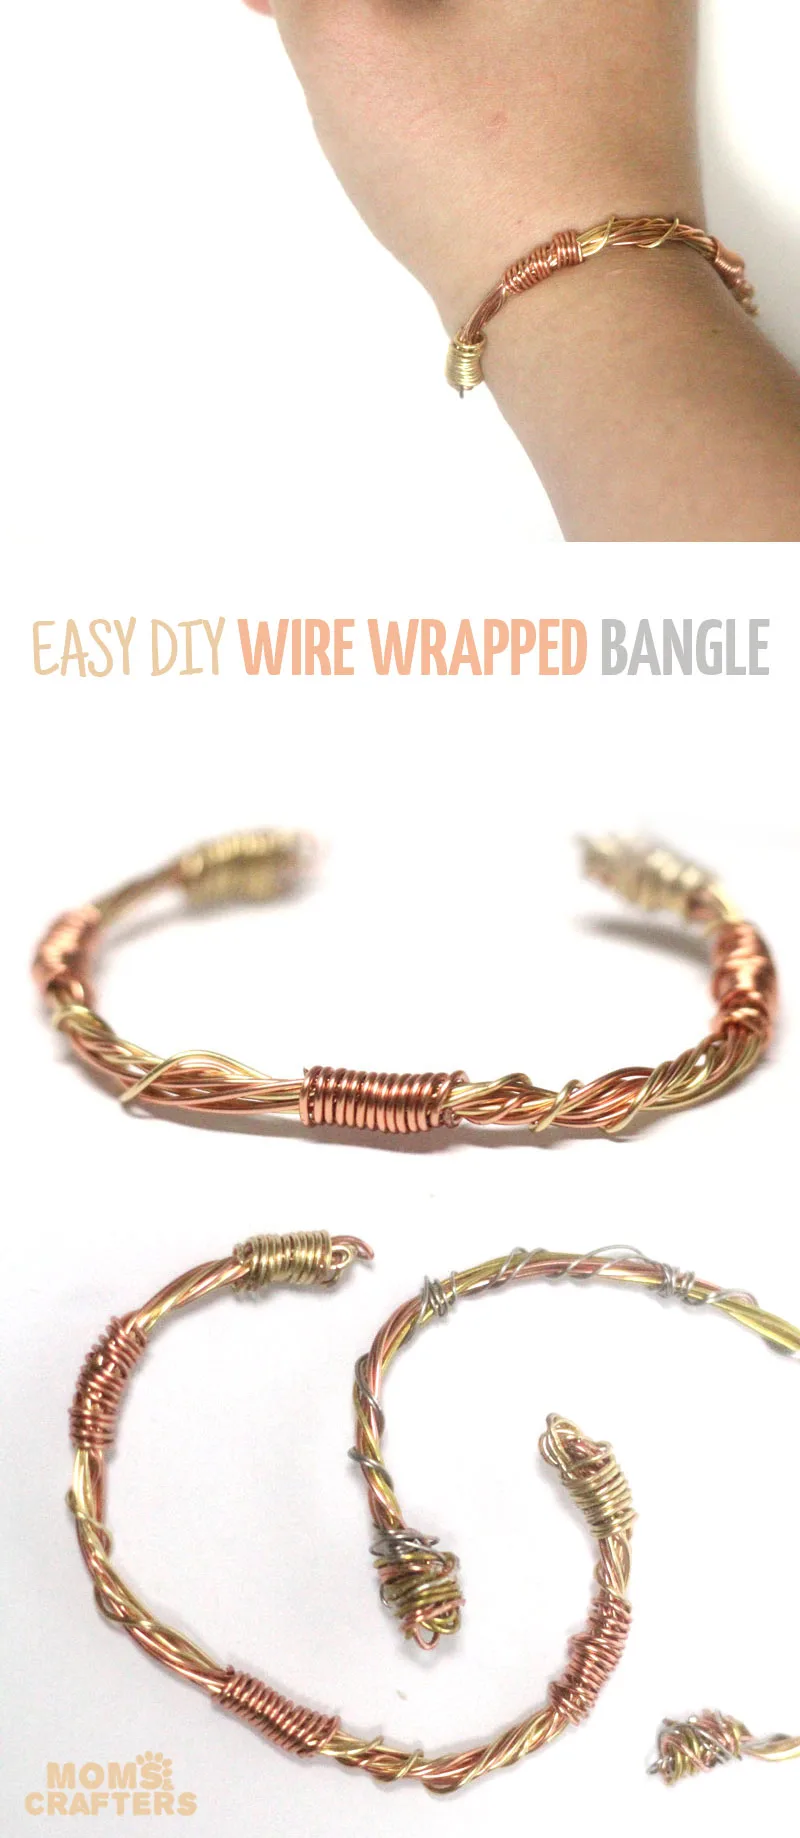 This beautiful wire wrapped bangle is perfect for stacking, for day or evening! I even wear mine alone and get so many compliments - just follow the simple step by step jewelry making tutorial including a video as well. This DIY jewelry making project is perfect for beginners or intermediate level